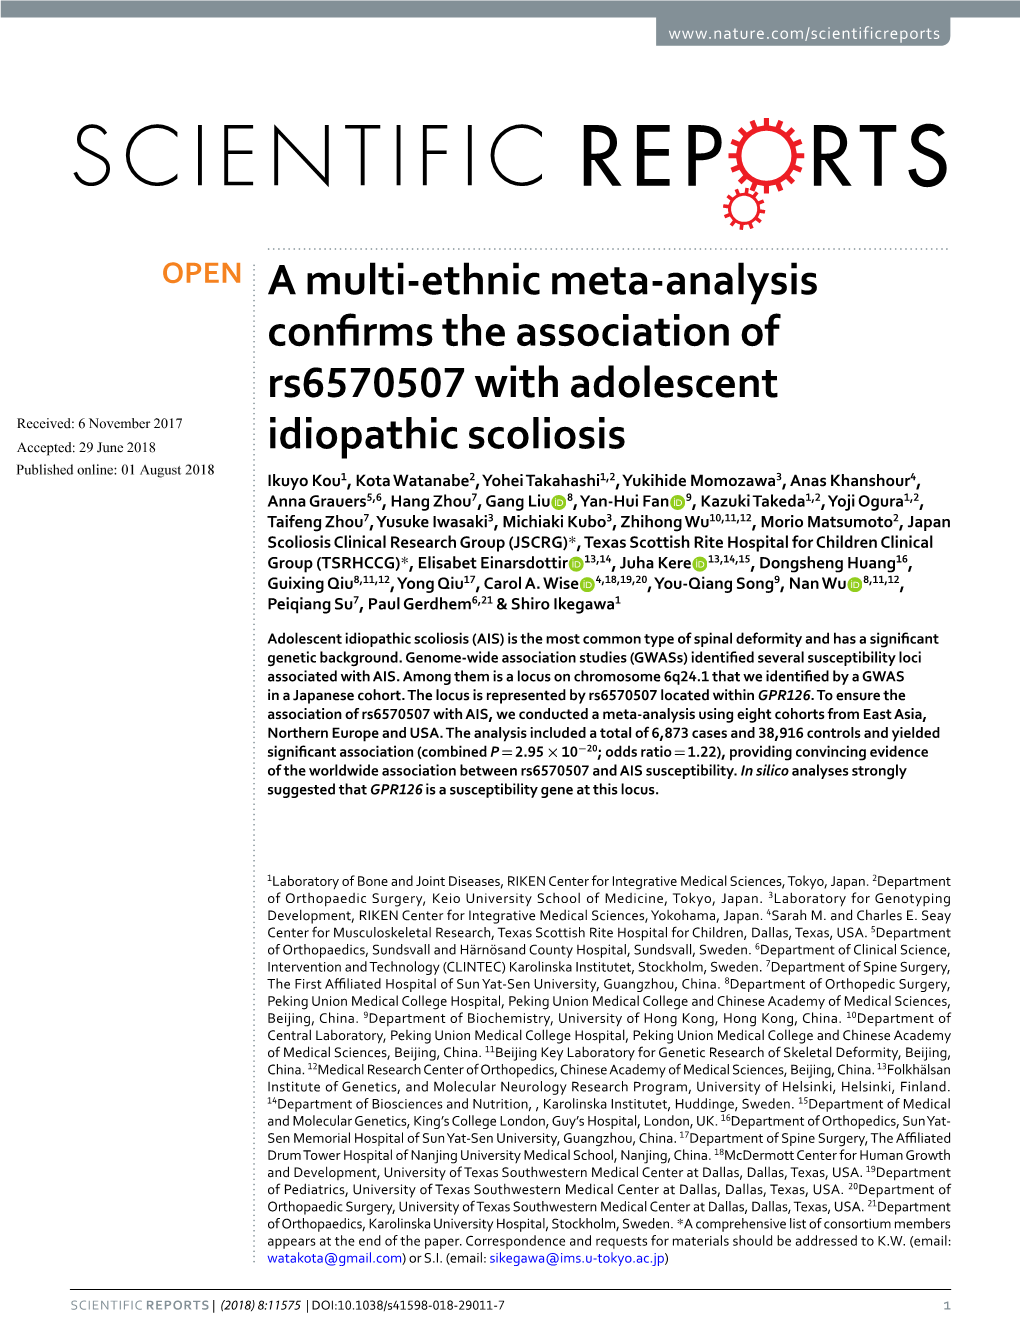 A Multi-Ethnic Meta-Analysis Confirms the Association of Rs6570507 With